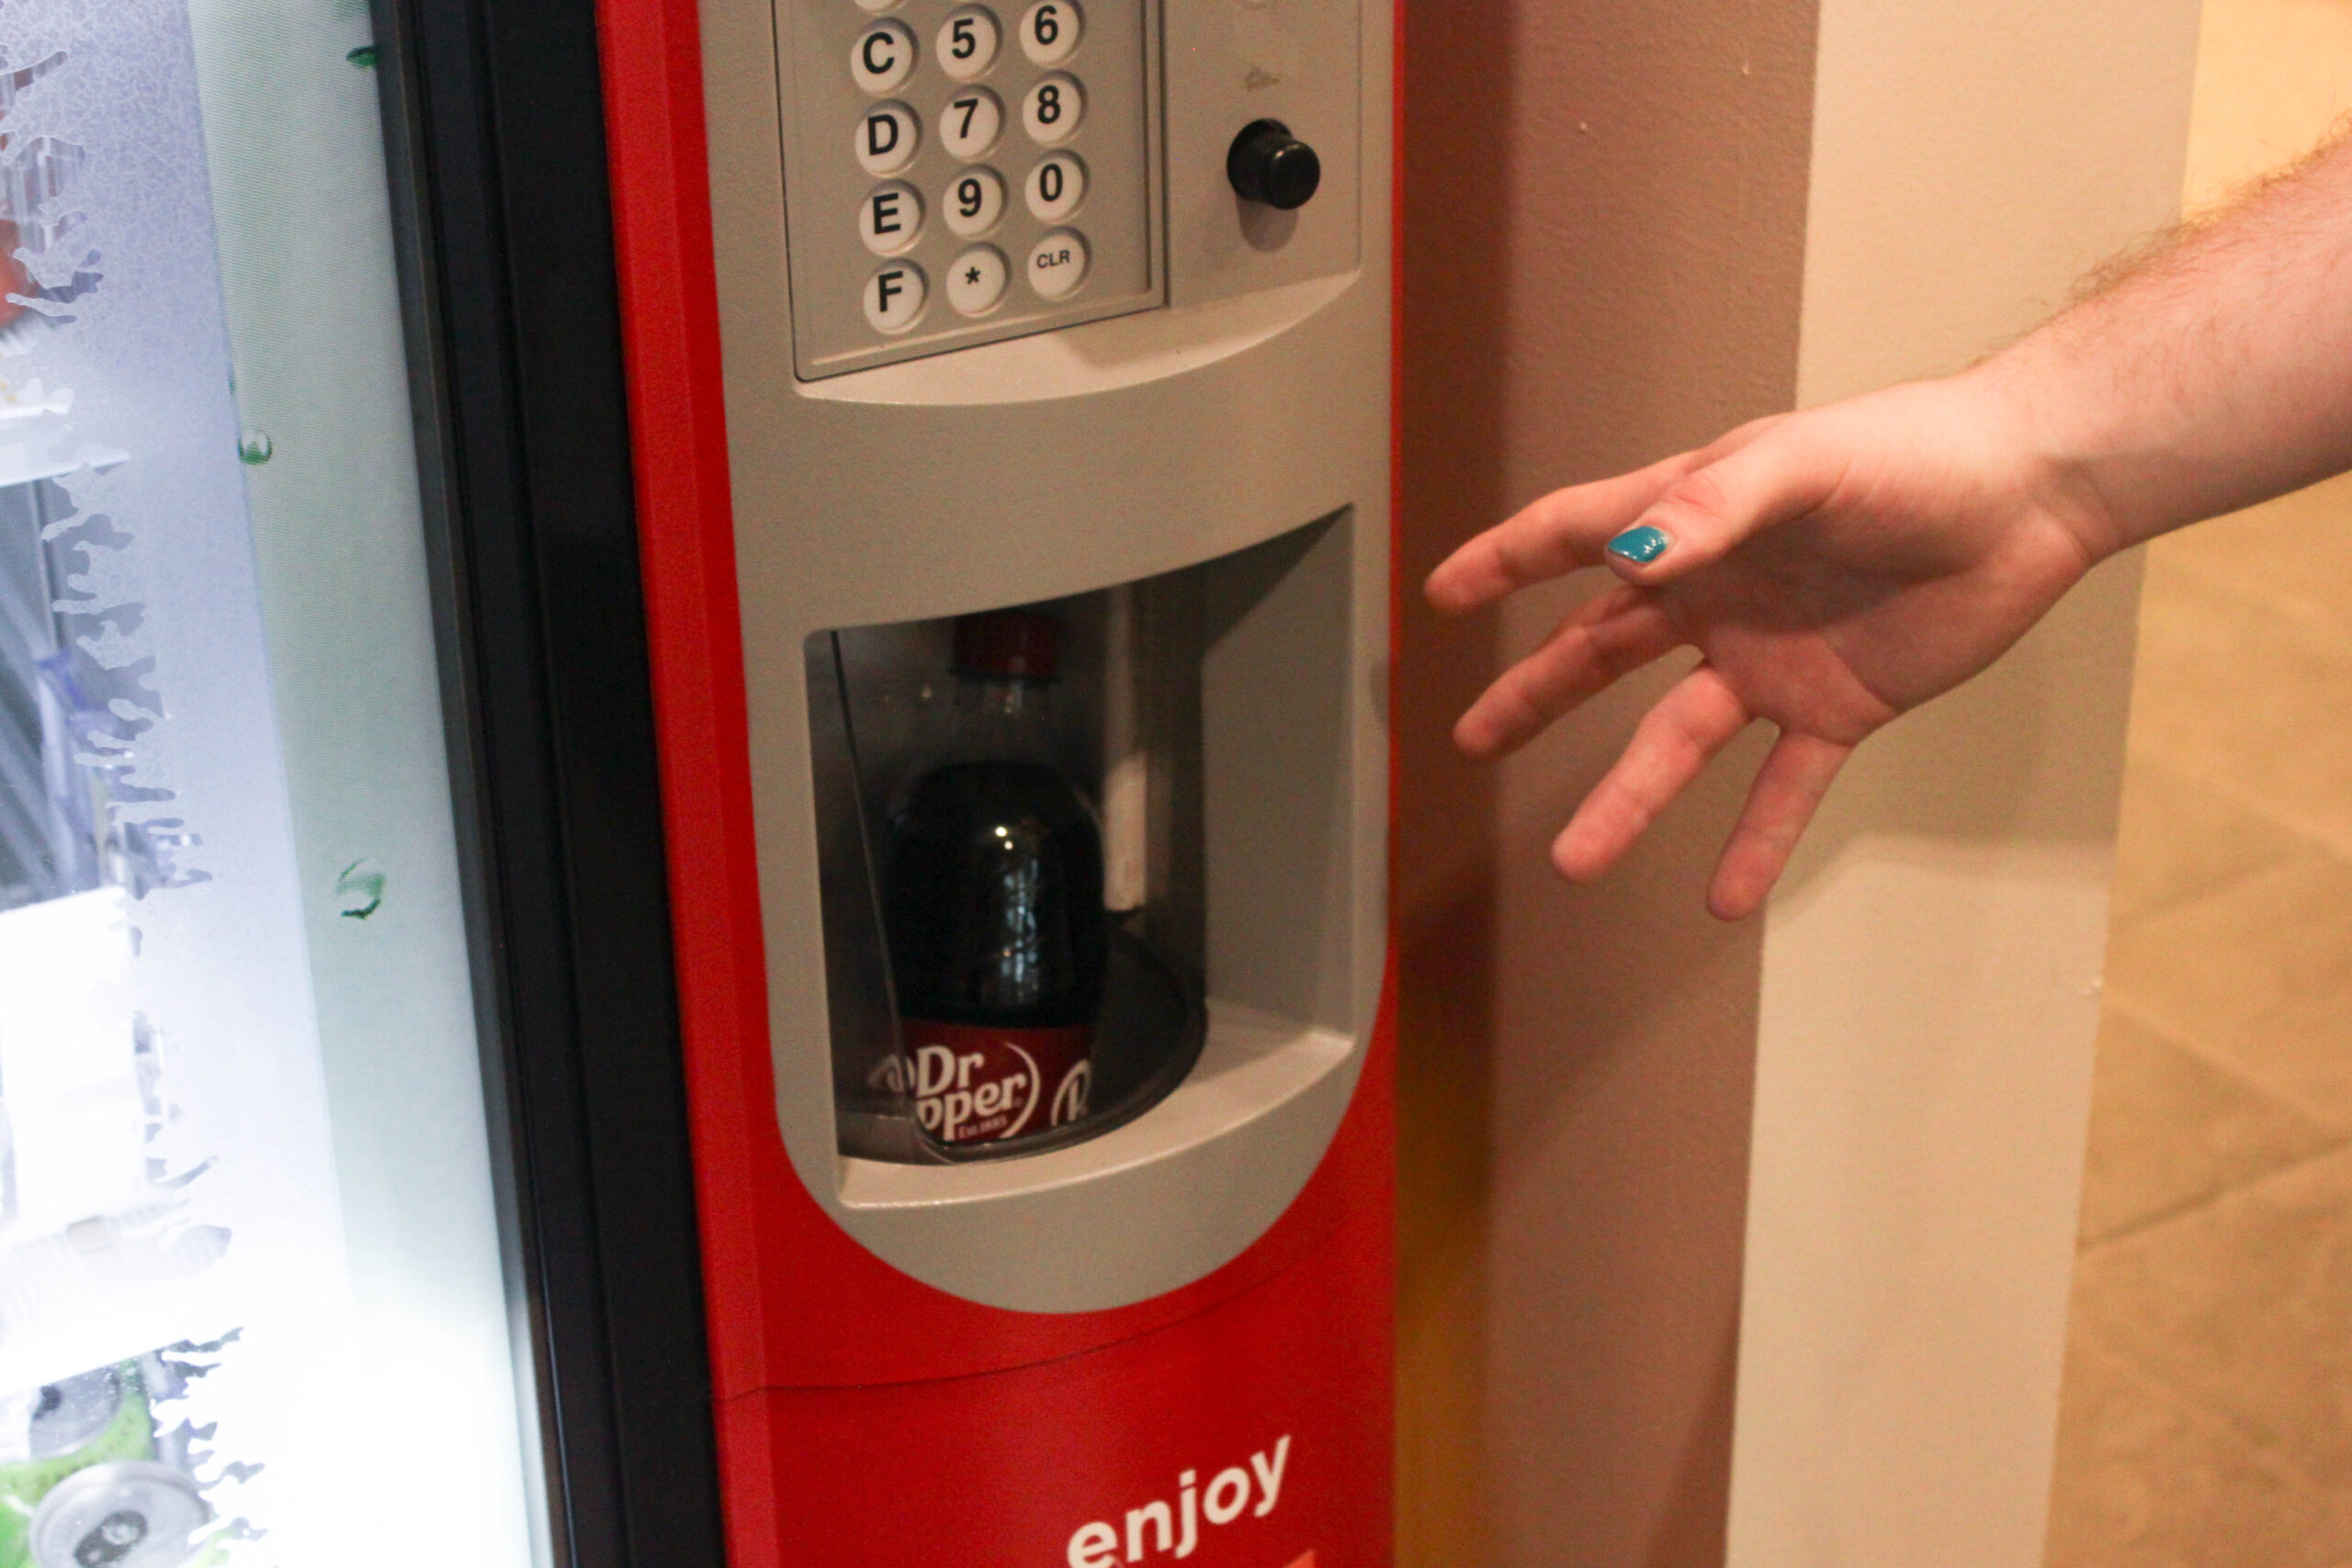 OPINION: Dr. Pepper Should Be Allowed In Campus Vending Machines